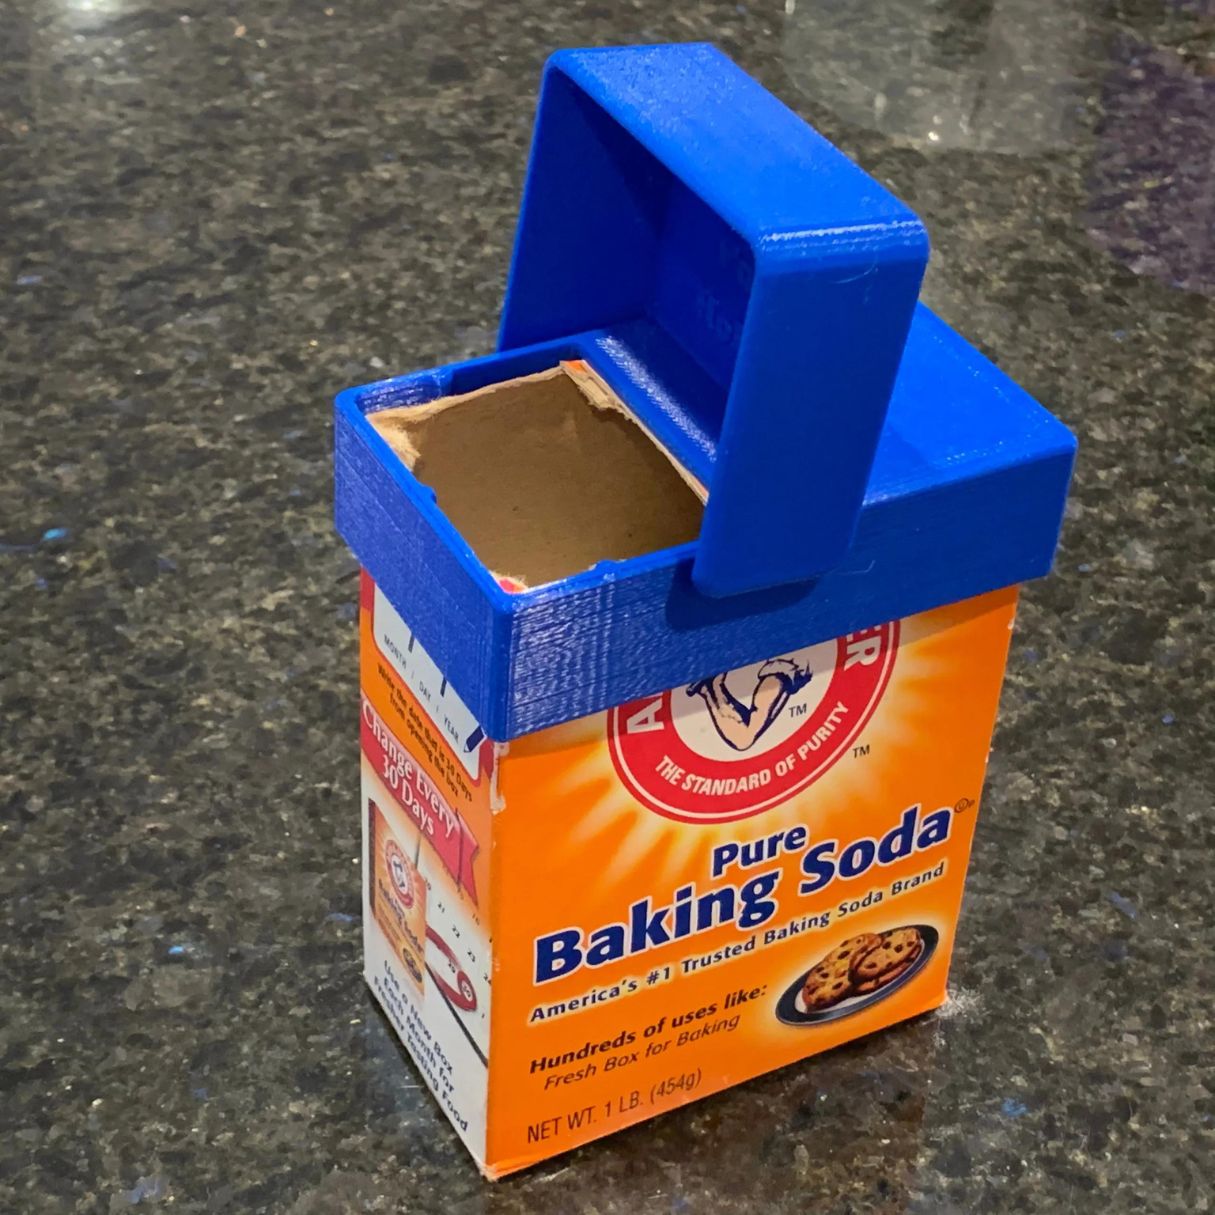 How To Store Baking Soda After Opening